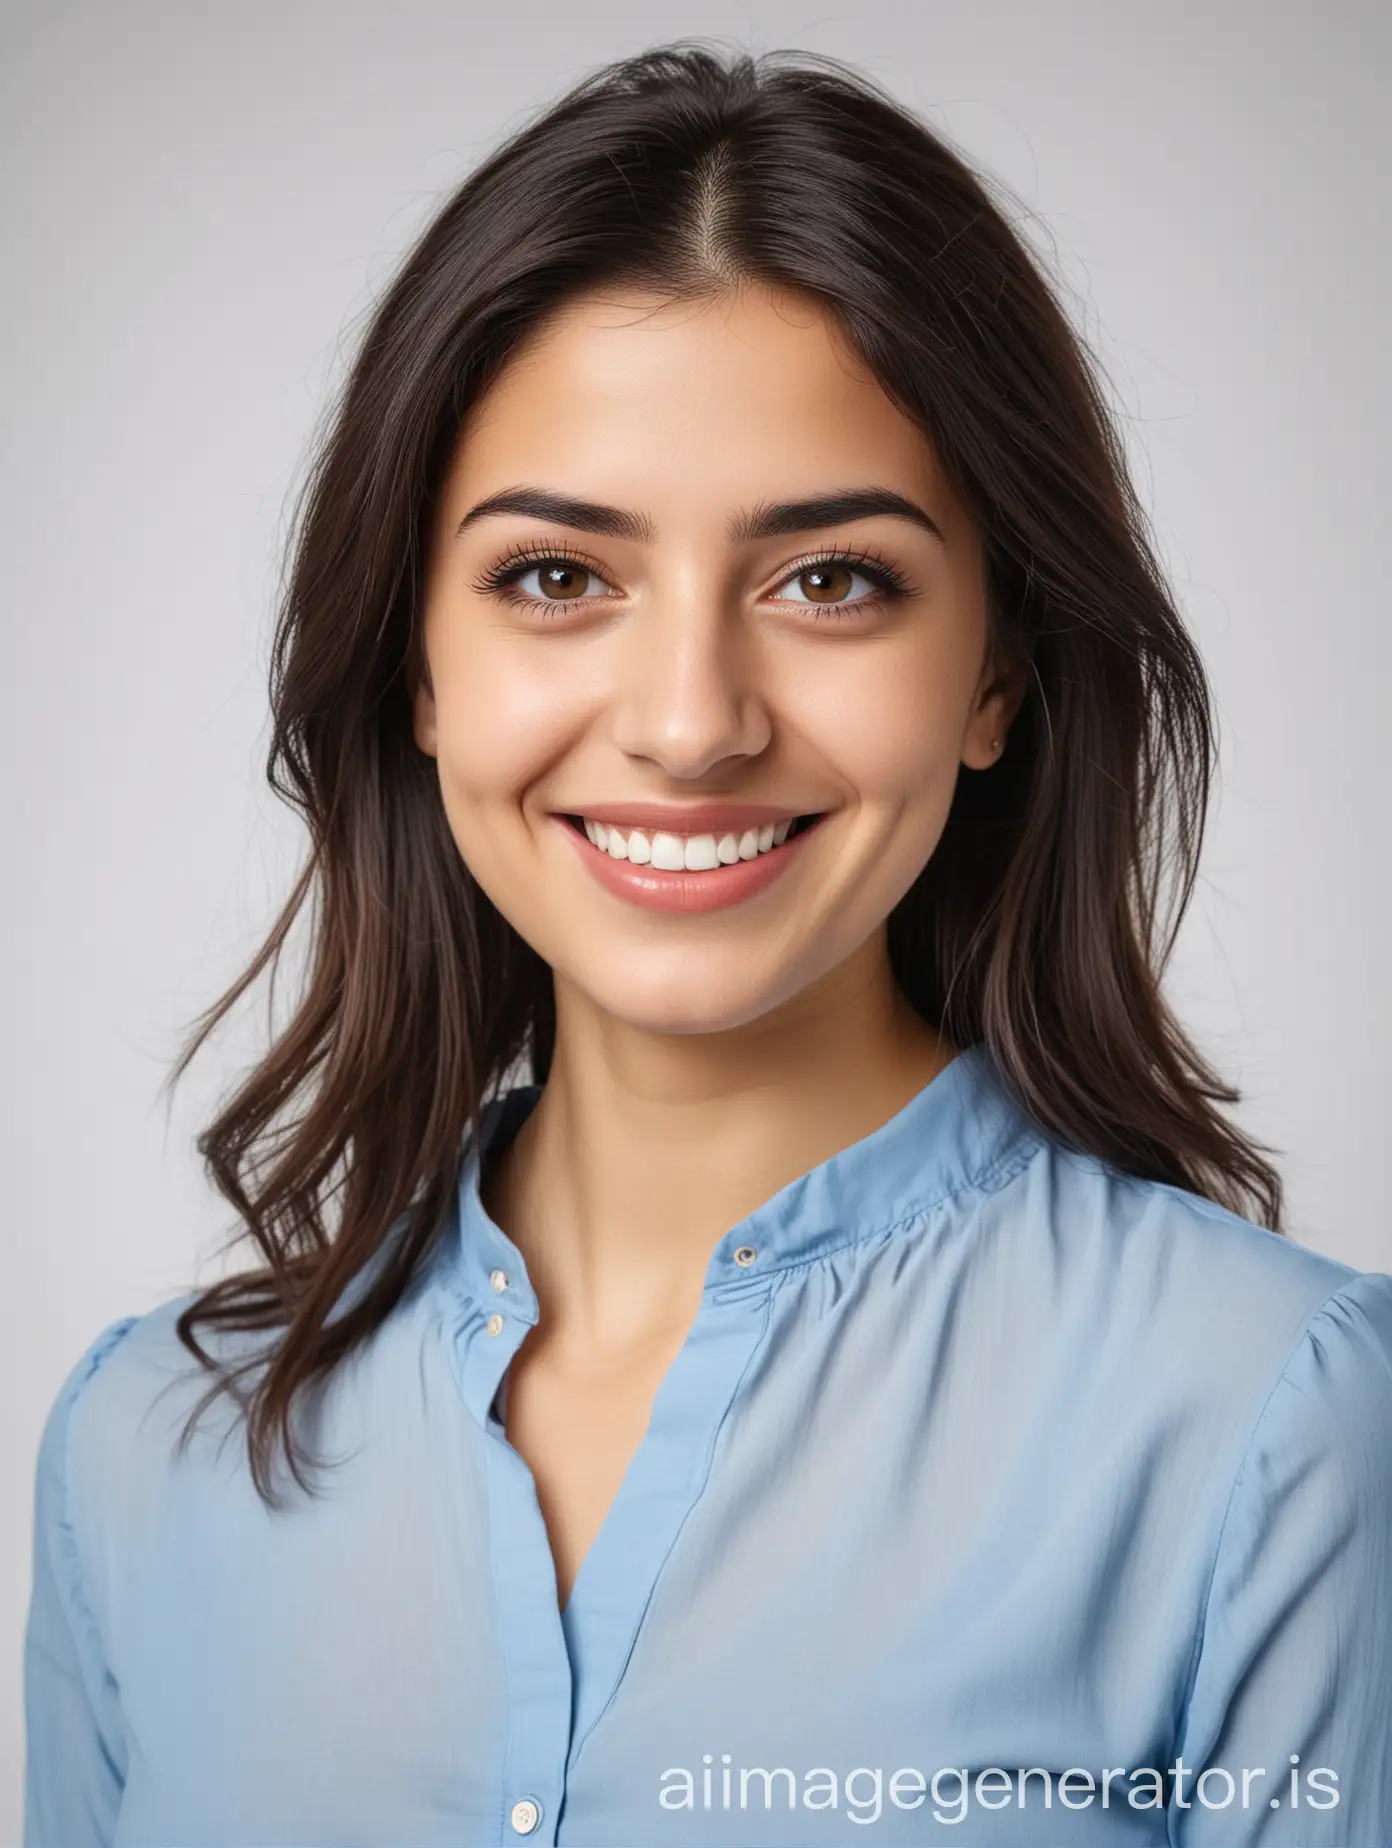 A young pretty Armenian woman in a blue blouse smiling on white background, straight posture.